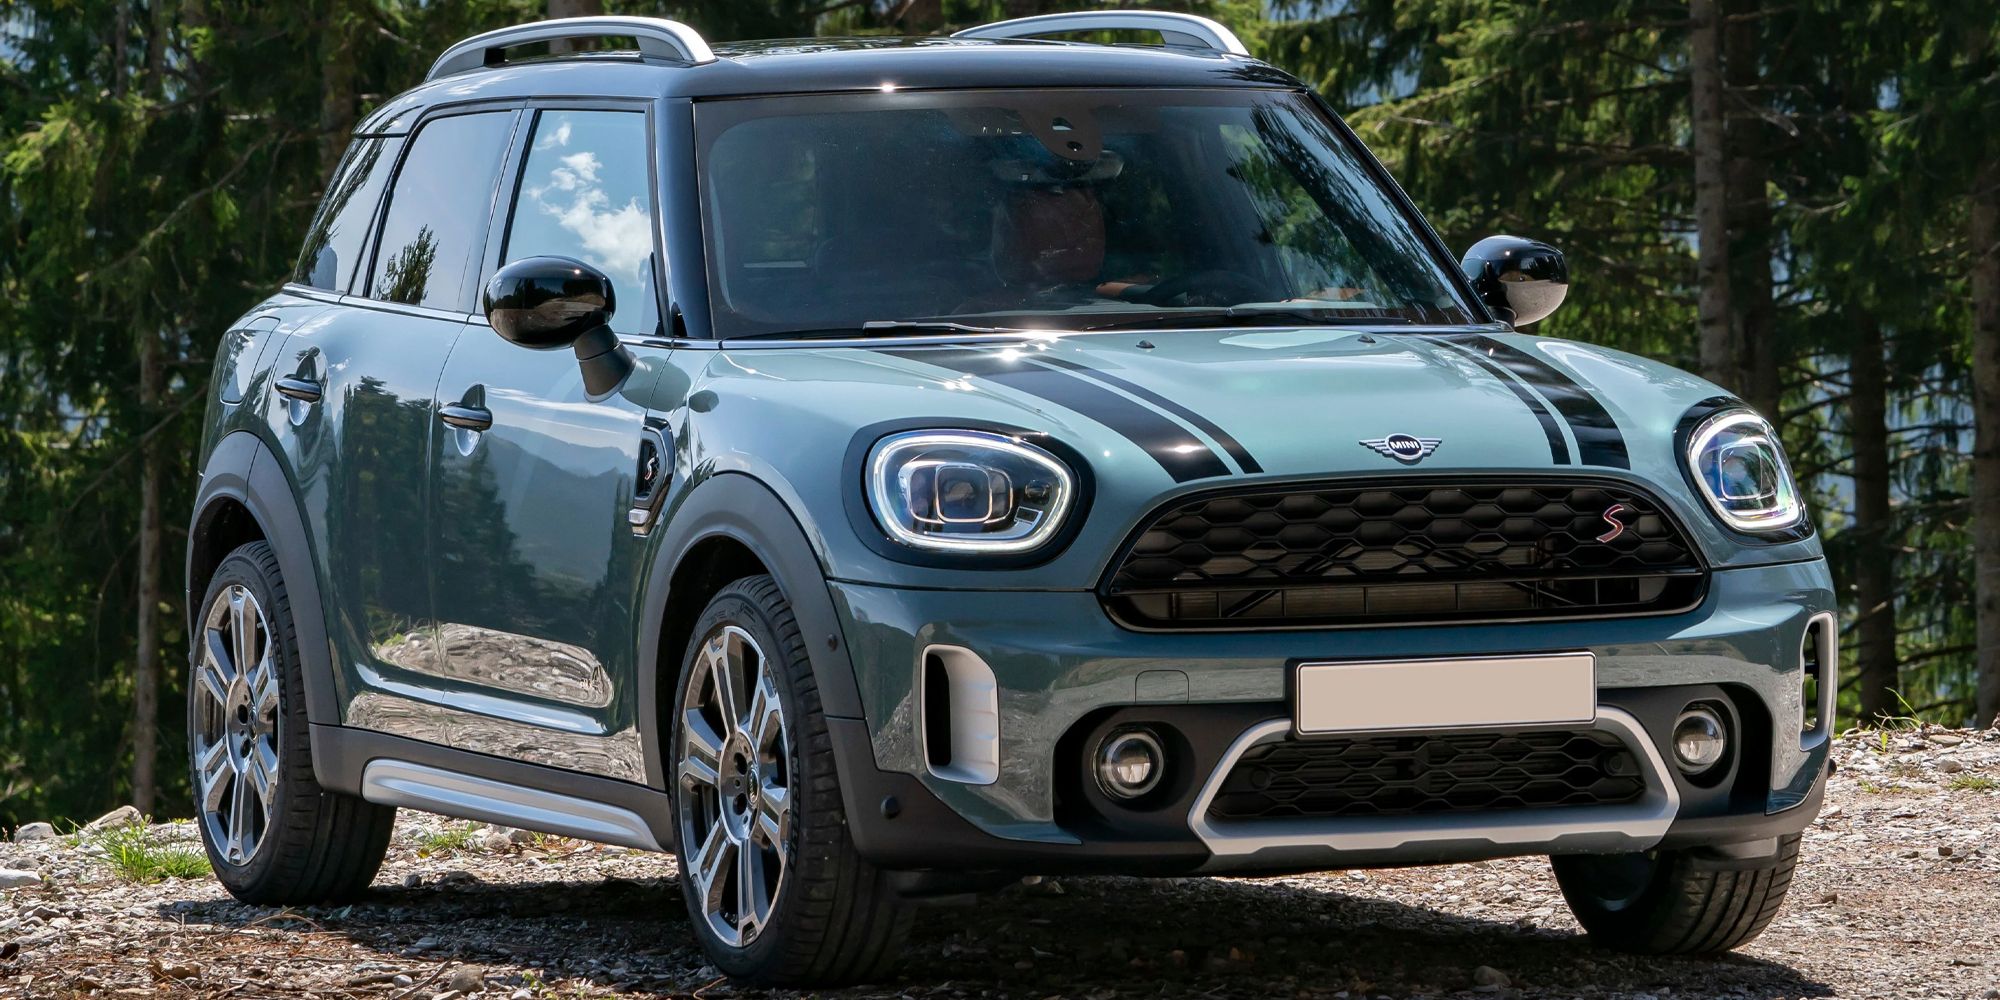 The front of the new Countryman